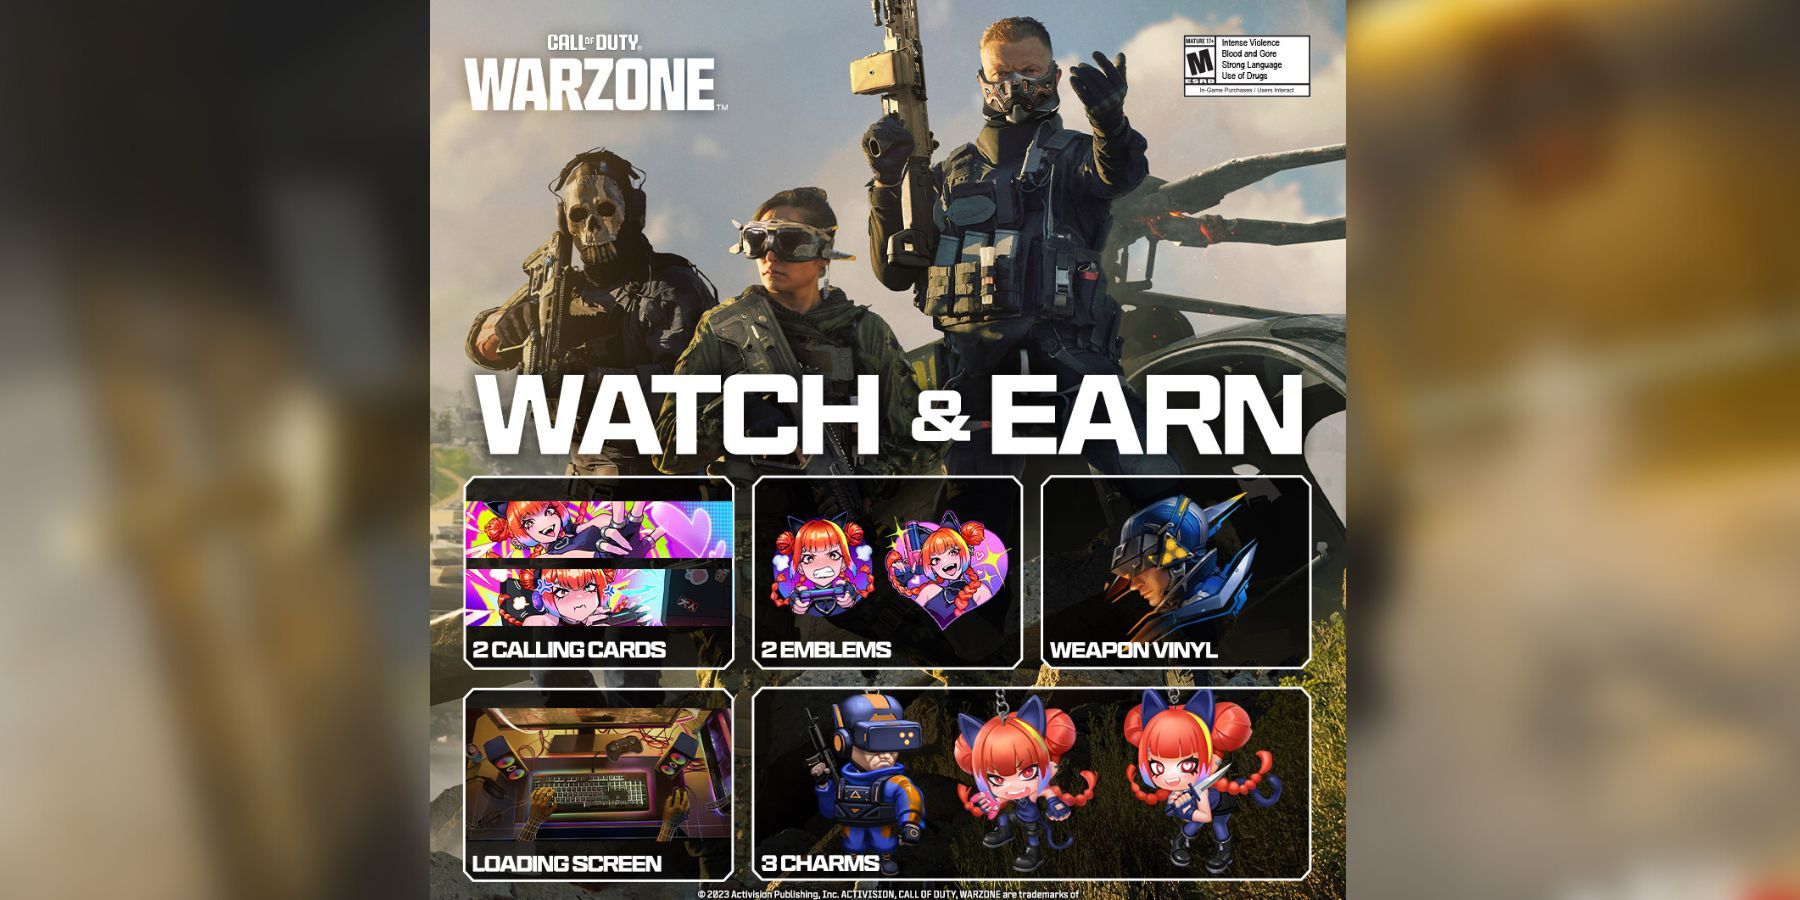 watch and earn rewards list for warzone twitch drops.